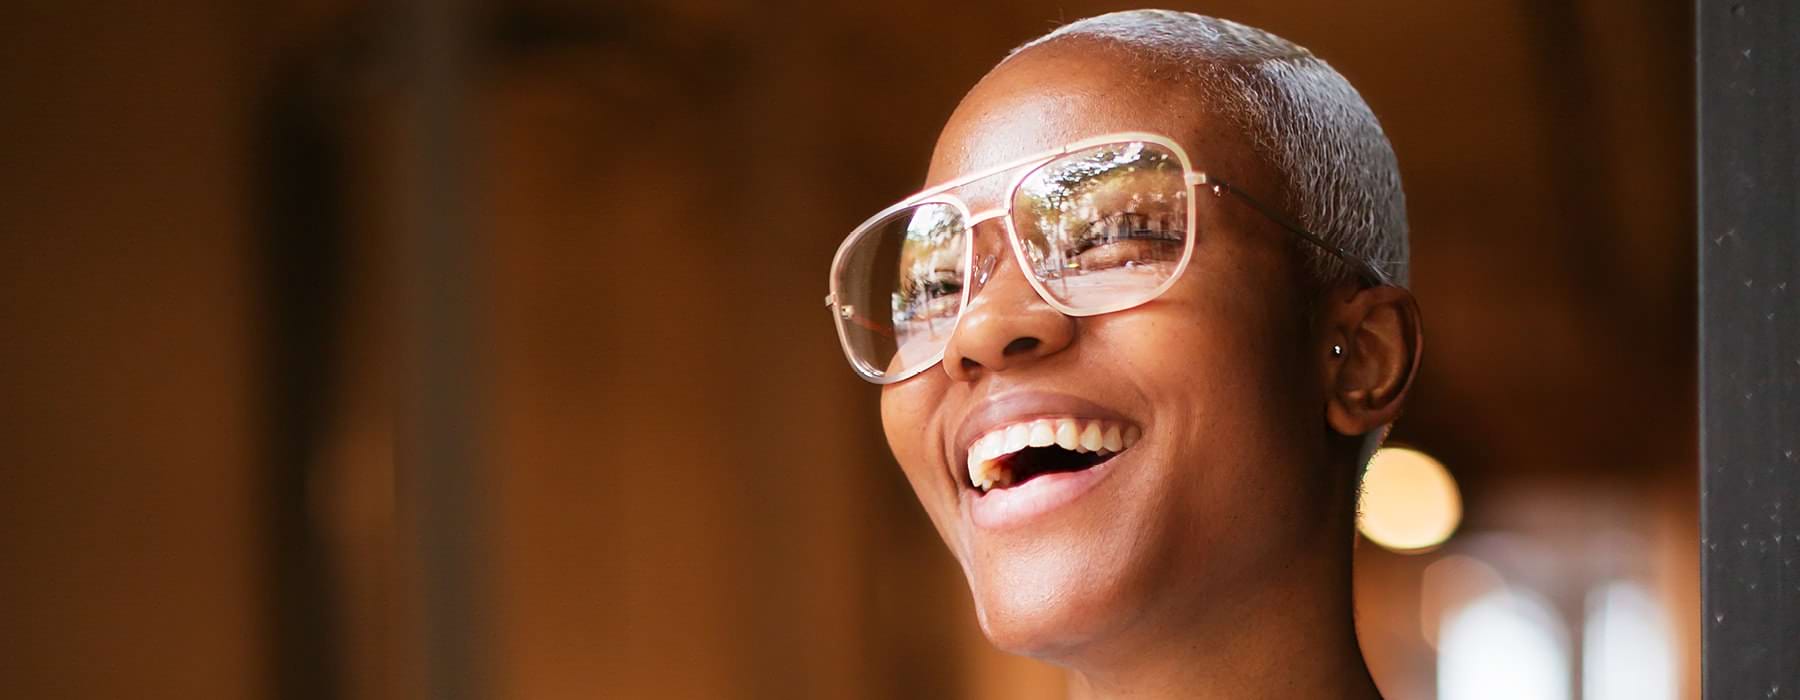 woman with large framed glasses laughs as she looks out her door